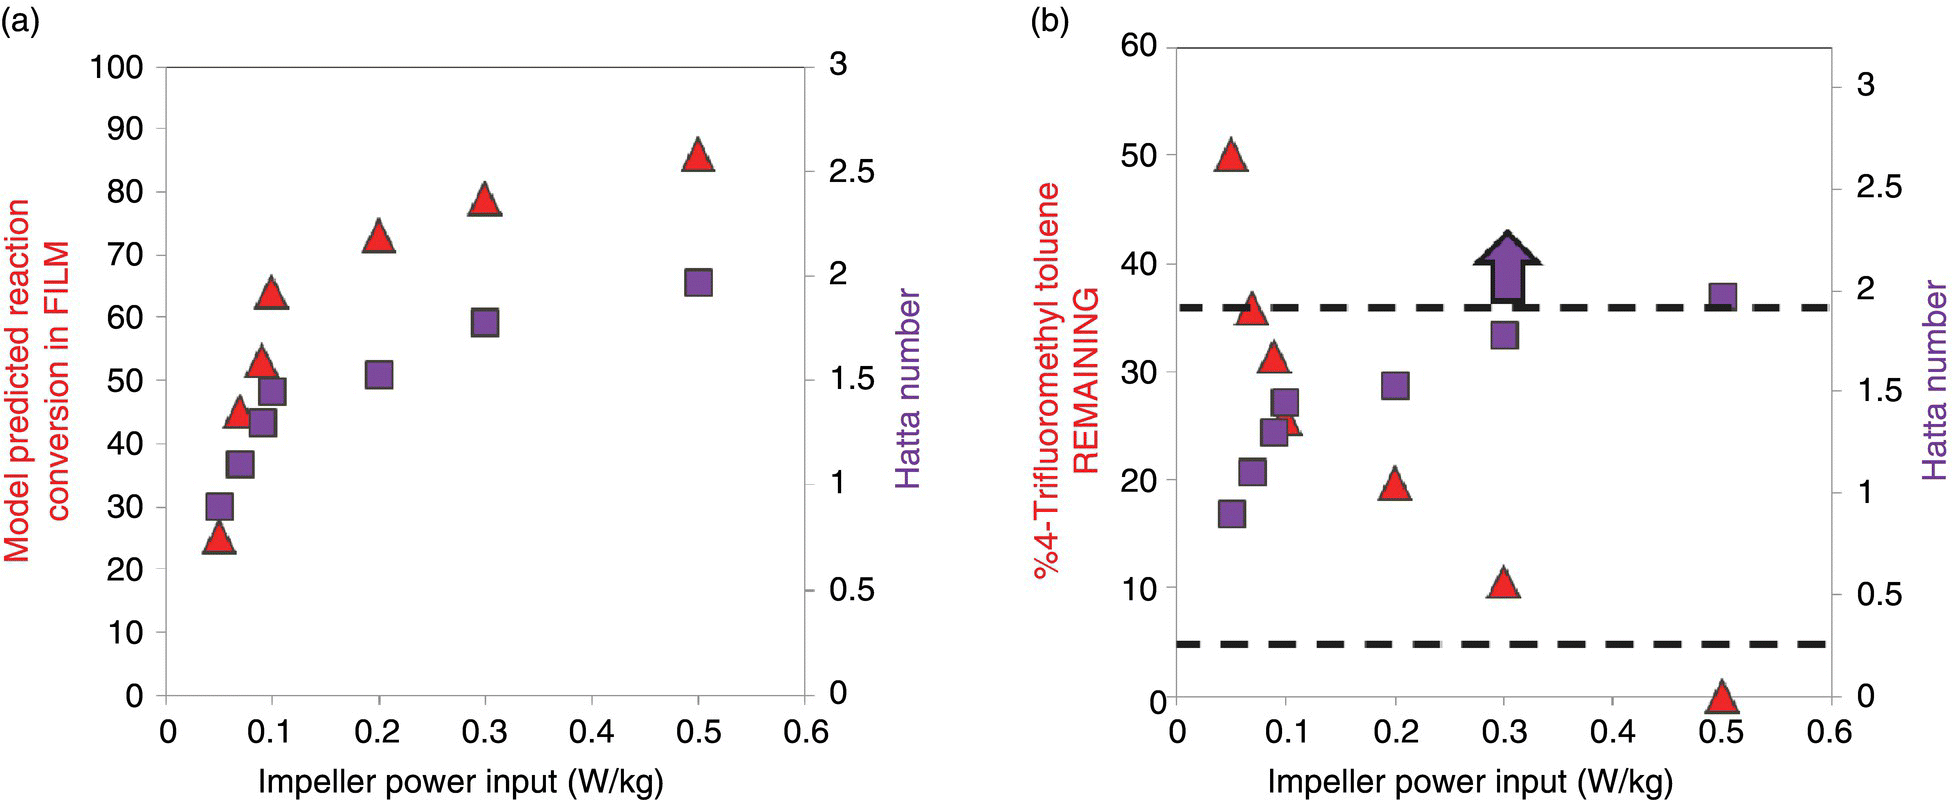 Graph of model predicted reaction conversion in FILM (a) and %4-Trifluoromethyl toluene REMAINING (b) vs. impeller power input, depicting 2 ascending curves formed by triangle and square markers and 2 horizontal dashed lines with scattered triangle and square markers, respectively.